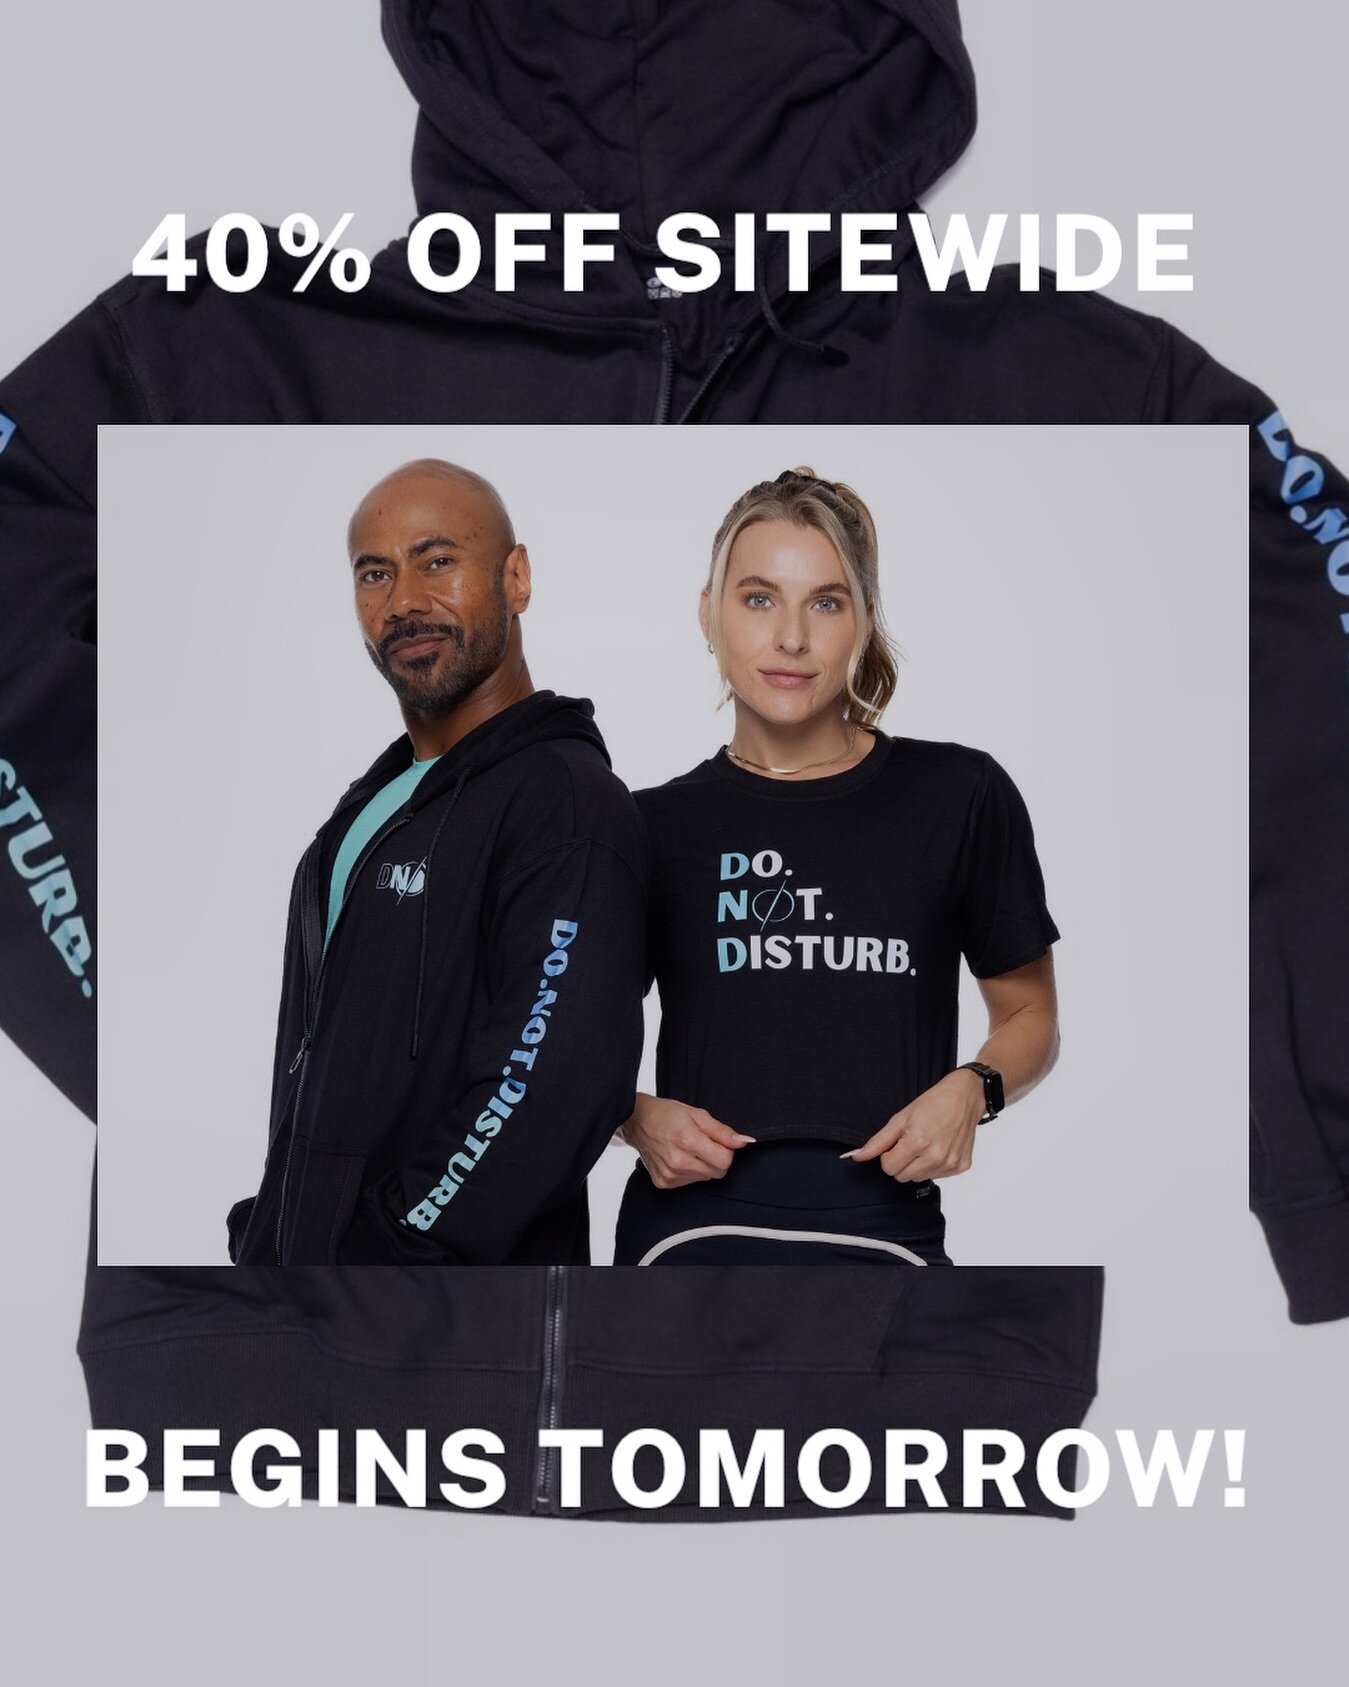 Tomorrow thru Monday 11/22-11/27 get 40% off all items in our online store plus free shipping! #blackfriday #blackfridaydeals #cybermonday #holidaysales #fitnessapparel